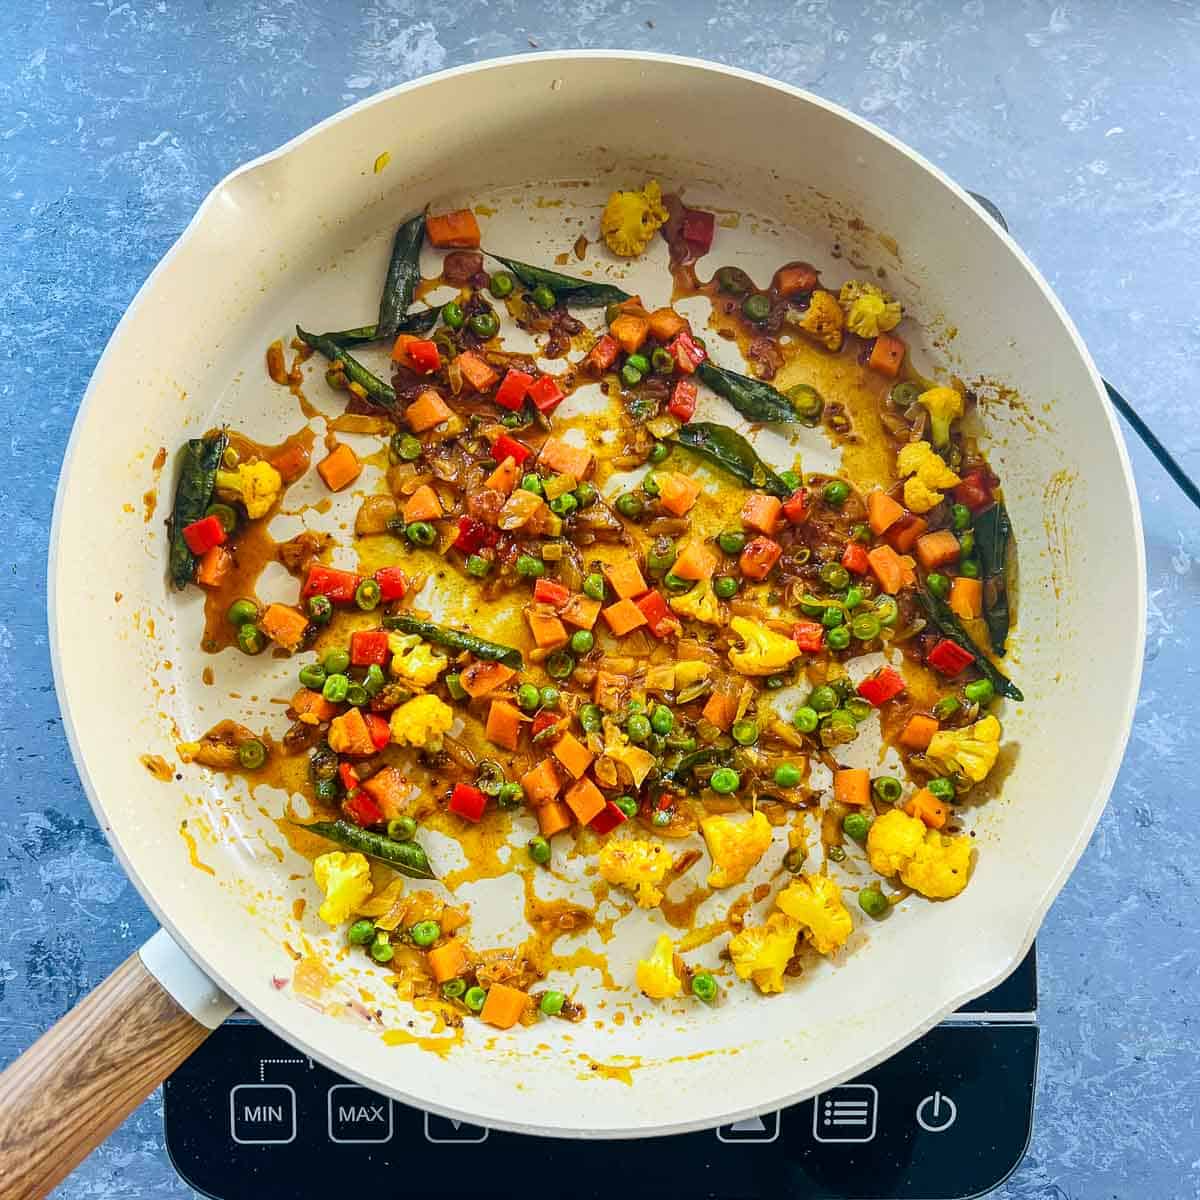 Cooked vegetables in the pan.